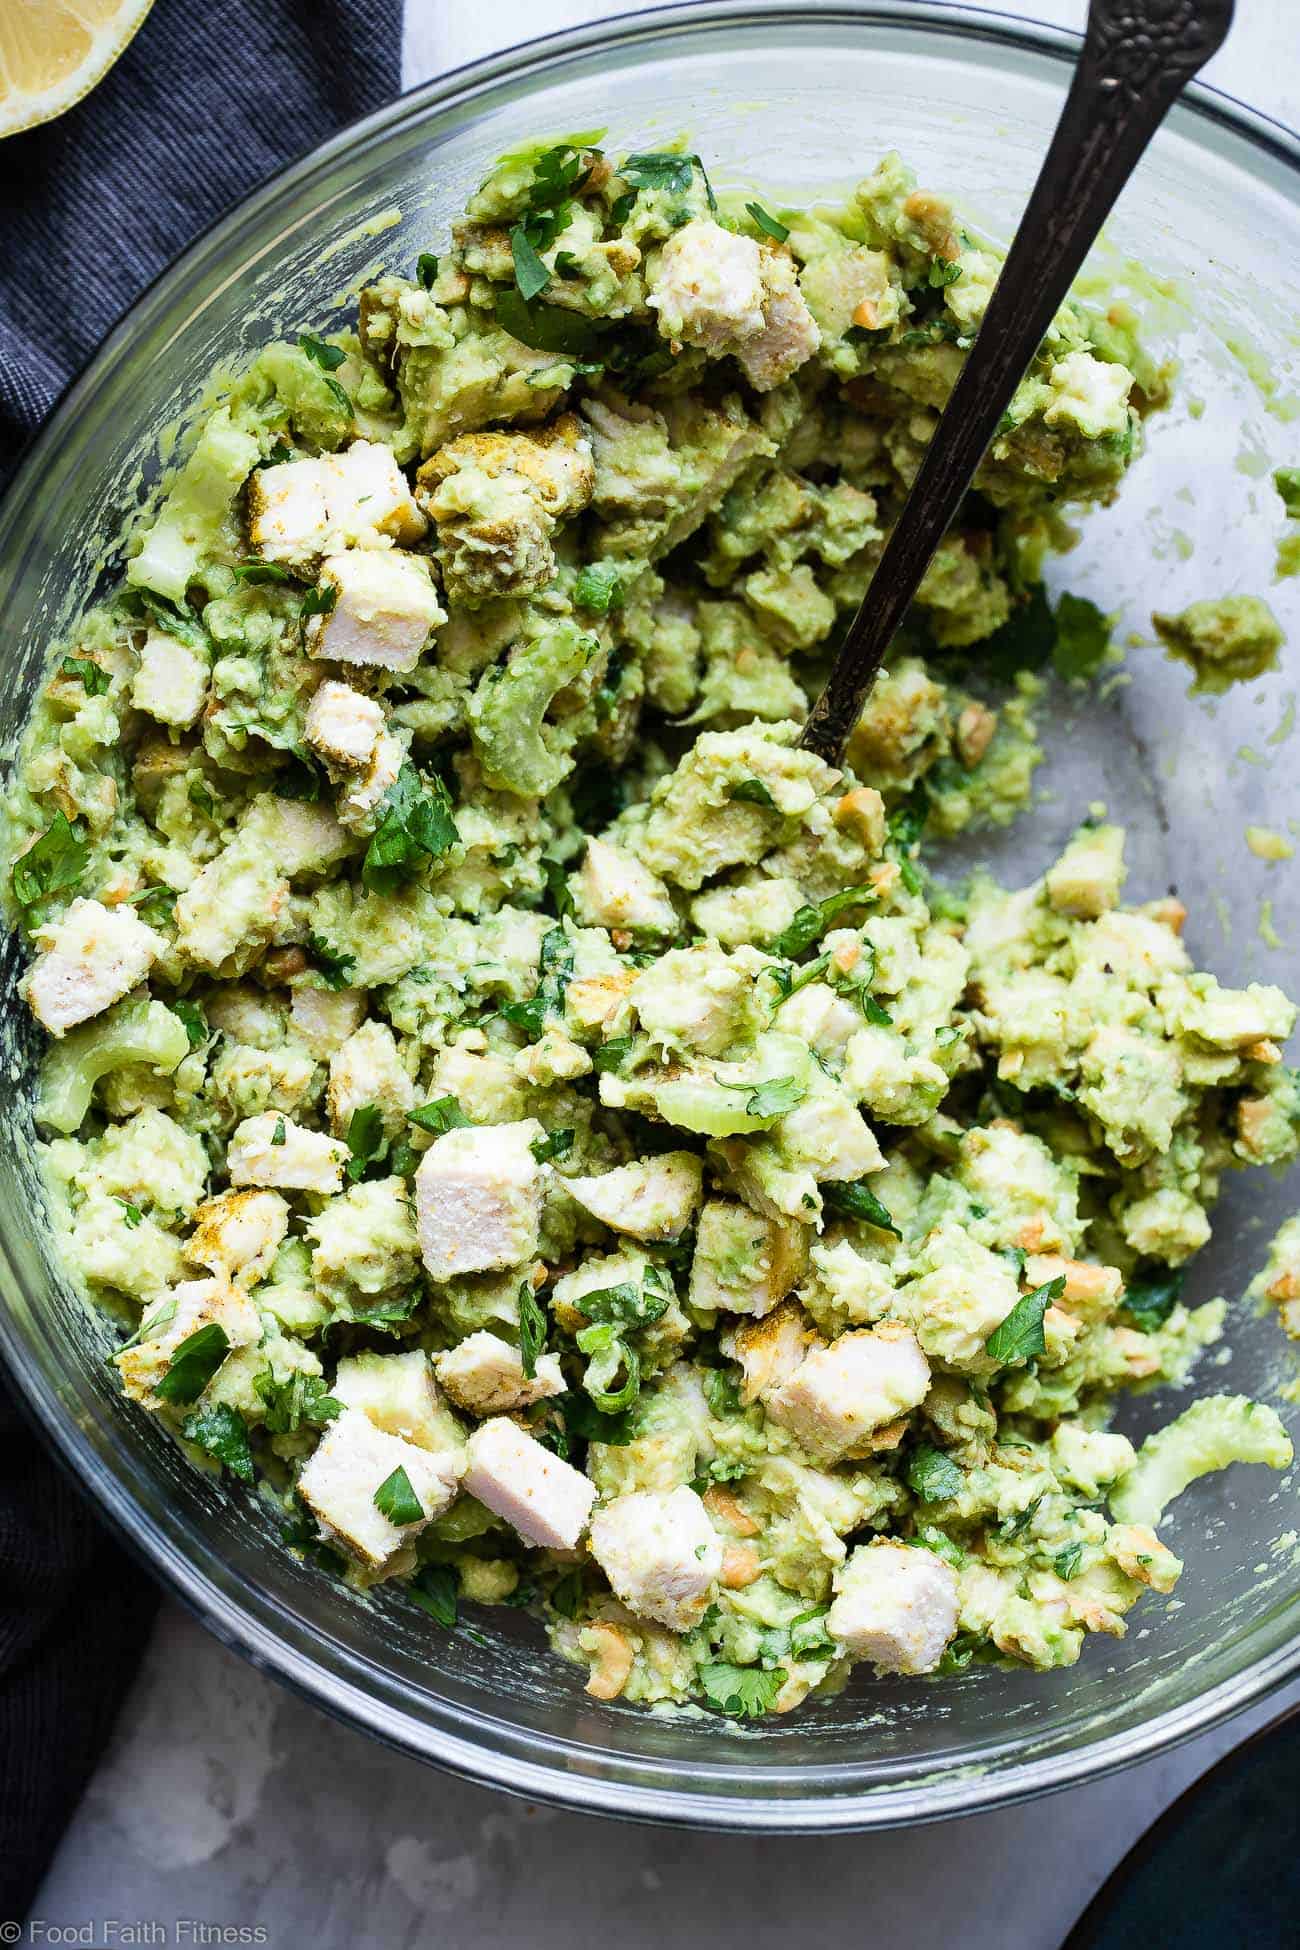 Curried Paleo Chicken Salad - This quick and easy dairy free paleo chicken salad is a low carb, keto friendly,  gluten free and whole30 compliant lunch, that is under 350 calorie, with a spicy curry kick! So creamy and delicious and great for meal prep! | Foodfaithfitness.com | @FoodFaithFit